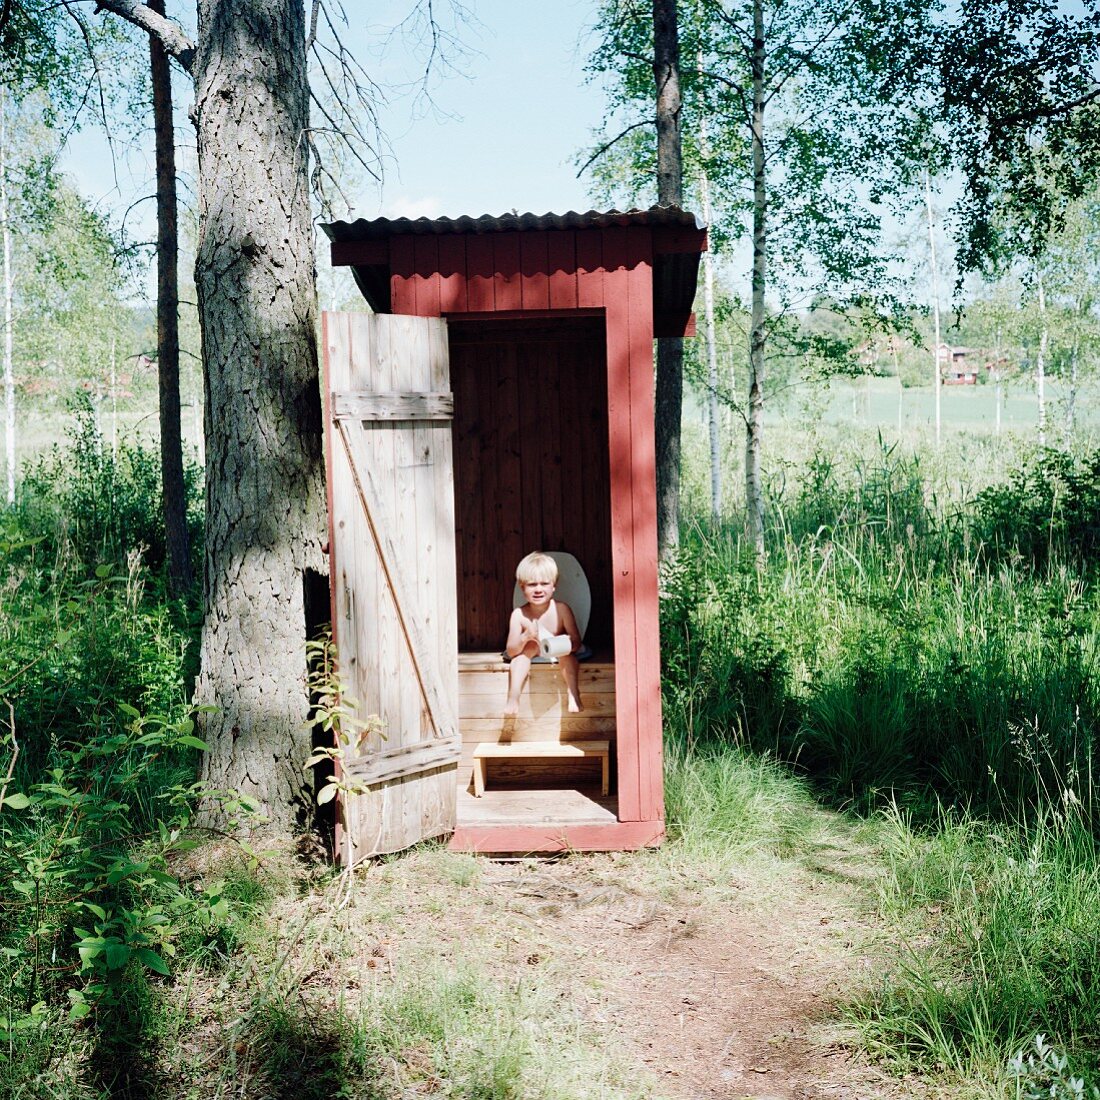 Little boy sitting on outhouse toilet